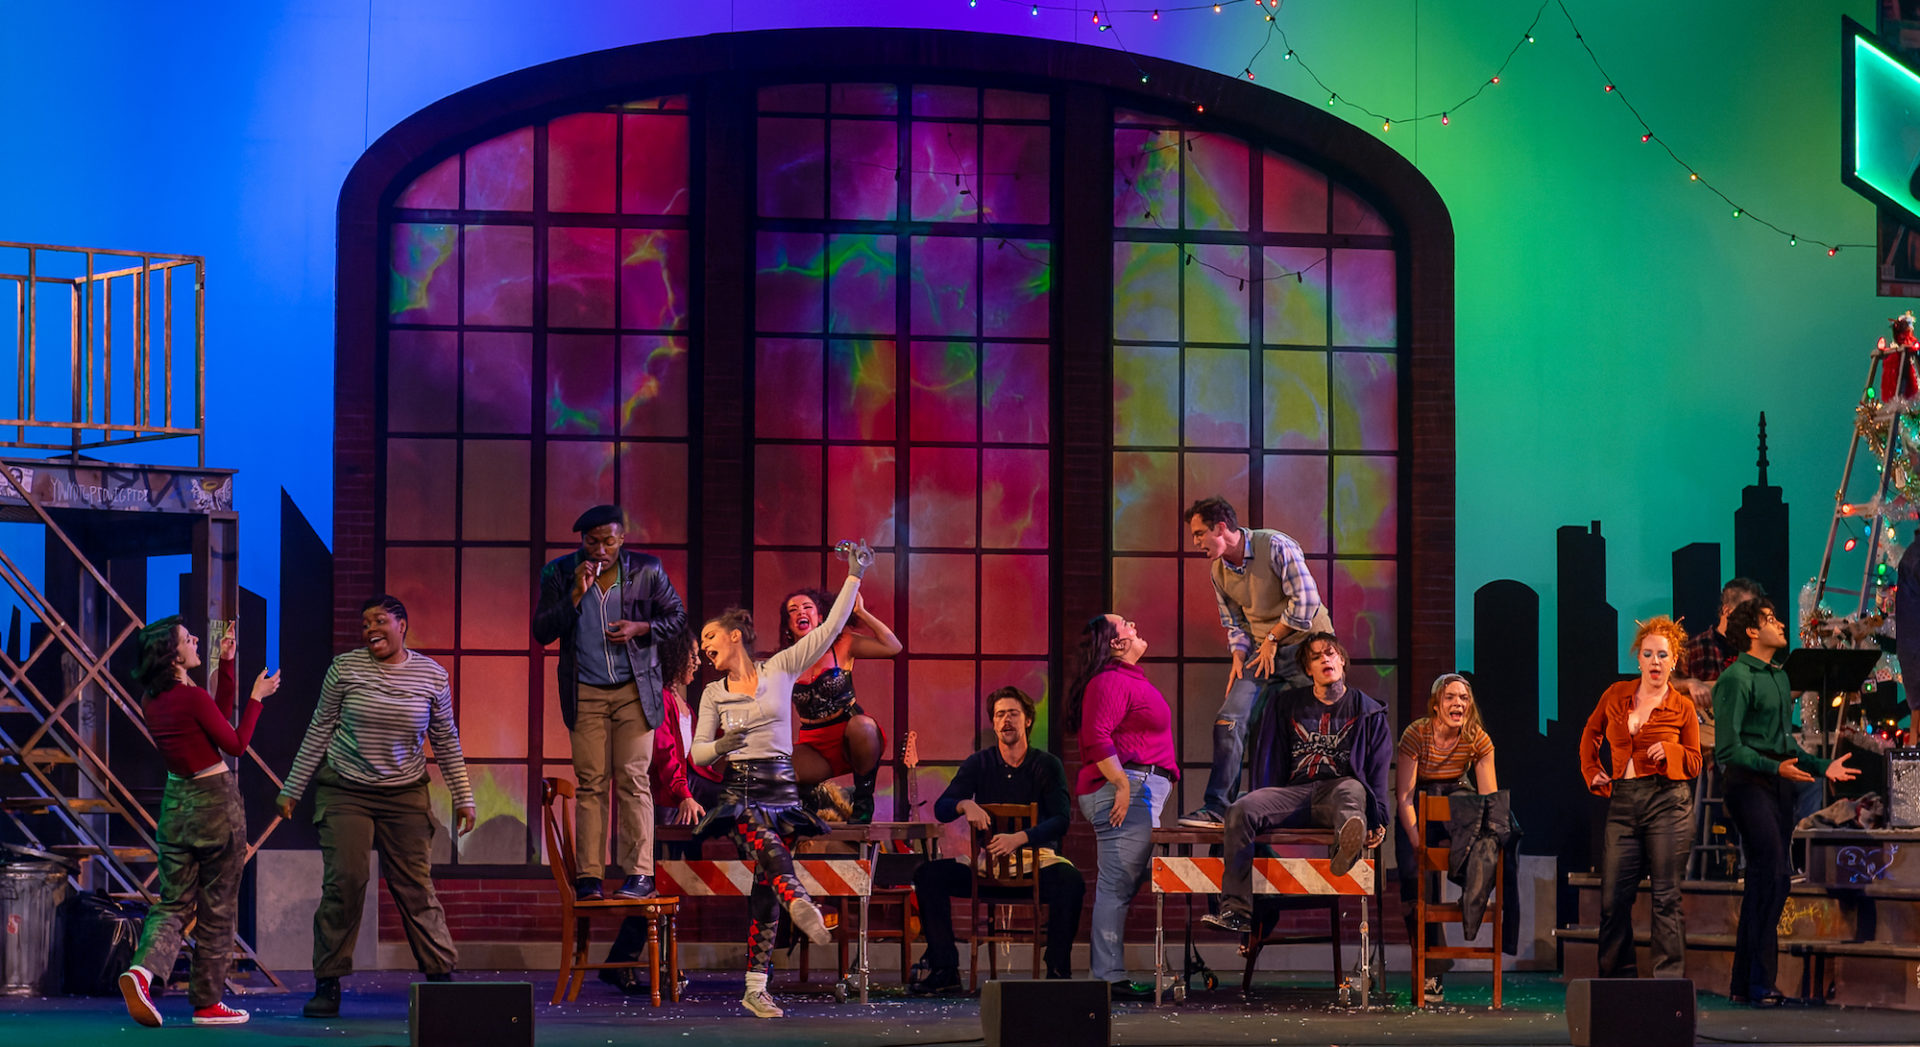 A colorful large arched window serves as the background while the actors from rent appear on stage singing